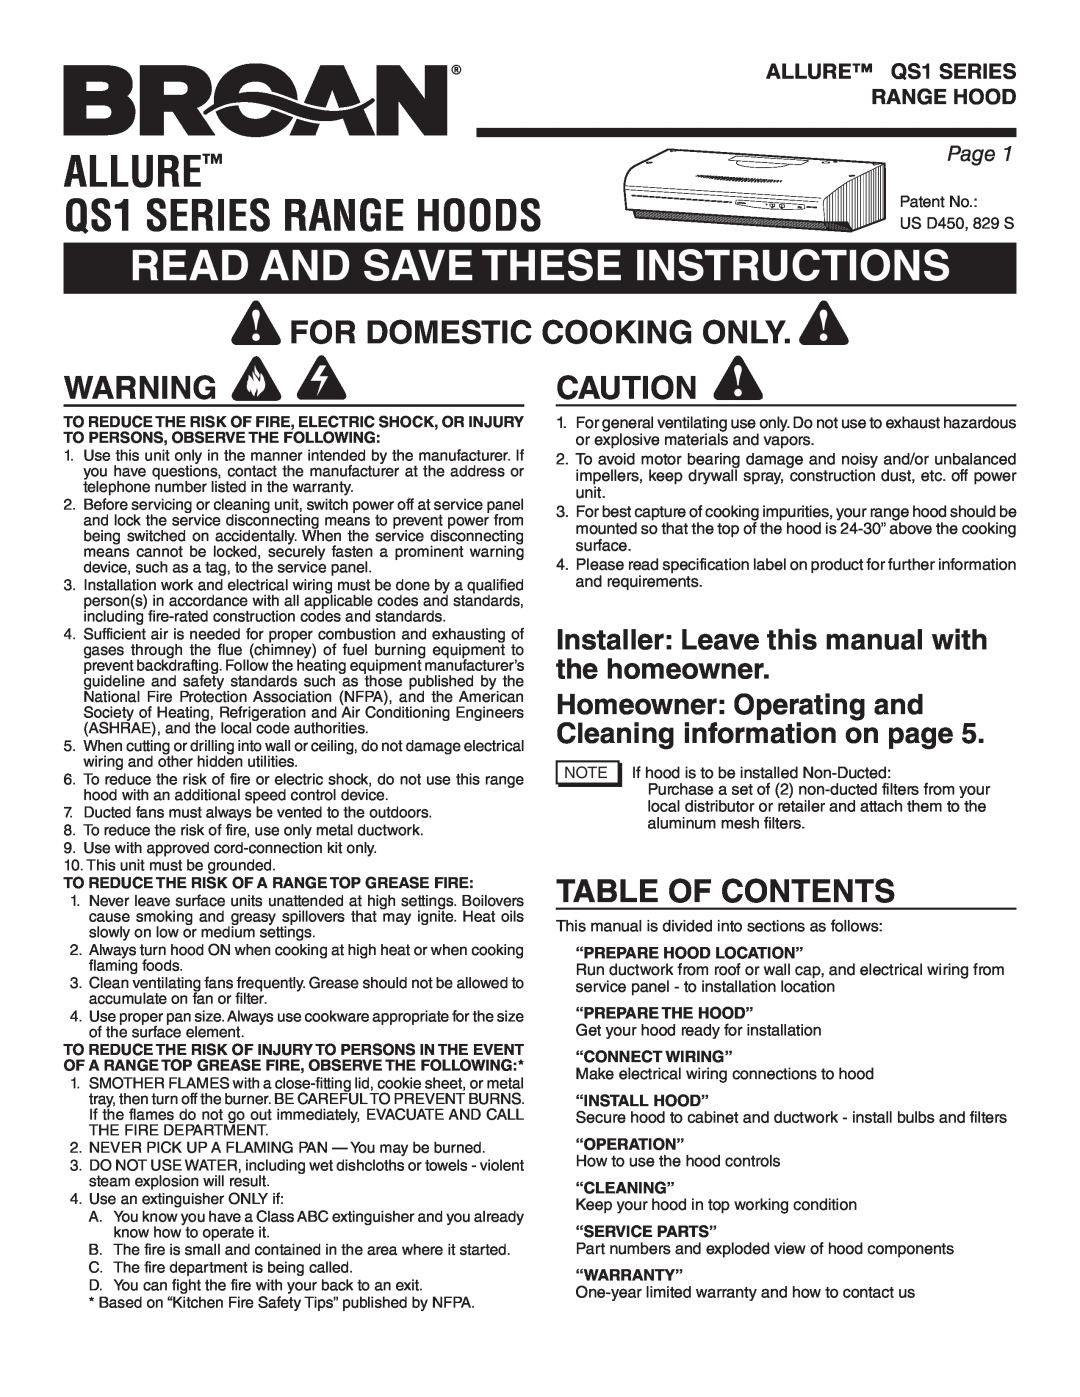 Broan QS130SS manual Allure, QS1 SERIES RANGE HOODS, Read And Save These Instructions, For Domestic Cooking Only, Page 